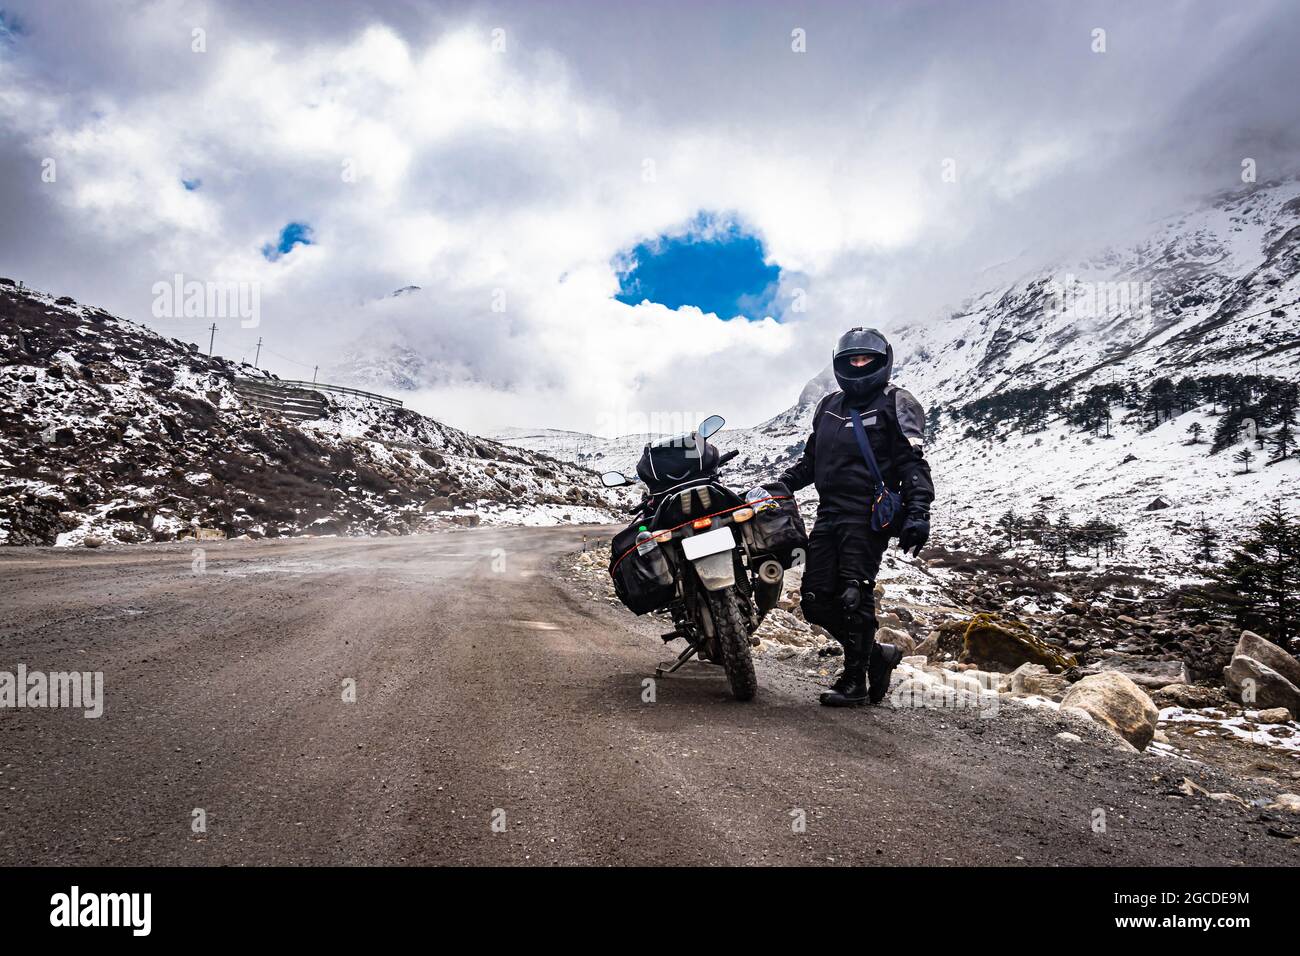 girl solo ridder in ridding gears with loaded motorcycle at isolated road and snow cap mountains image is taken at sela pass tawang arunachal pradesh. Stock Photo